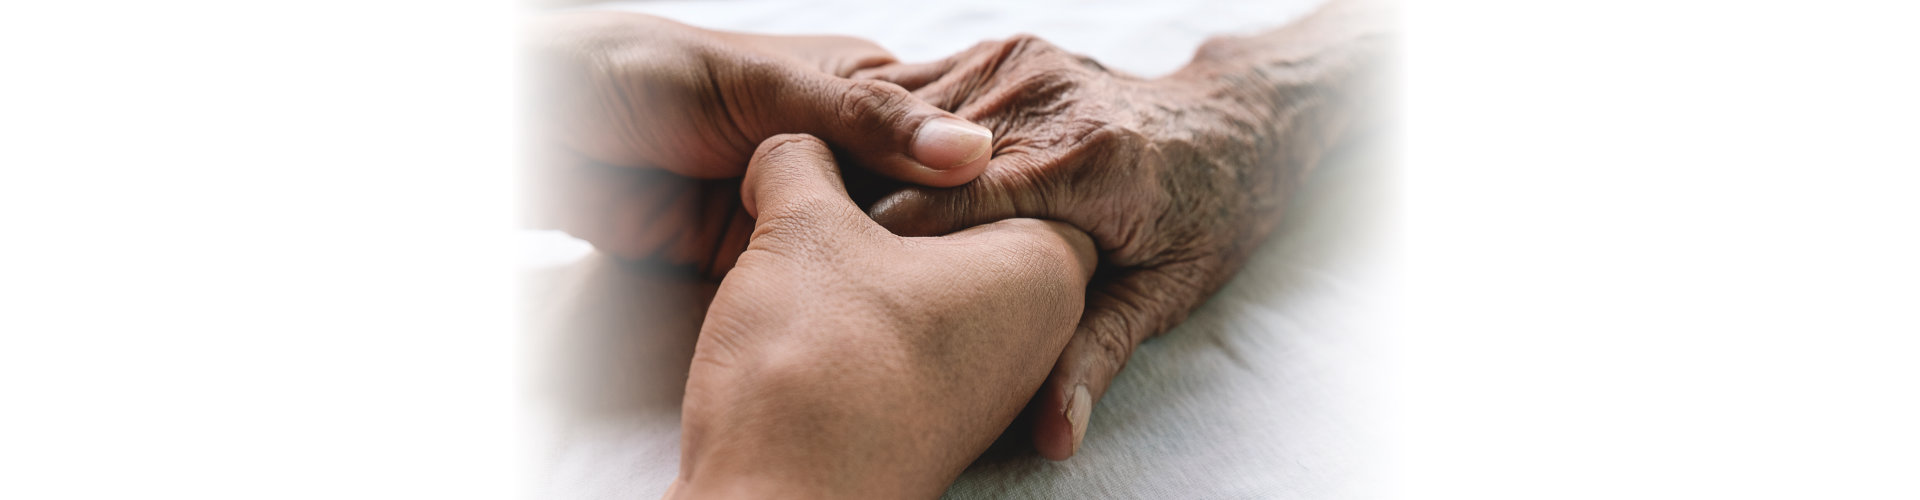 younger person's hand holding an elderly person's hand